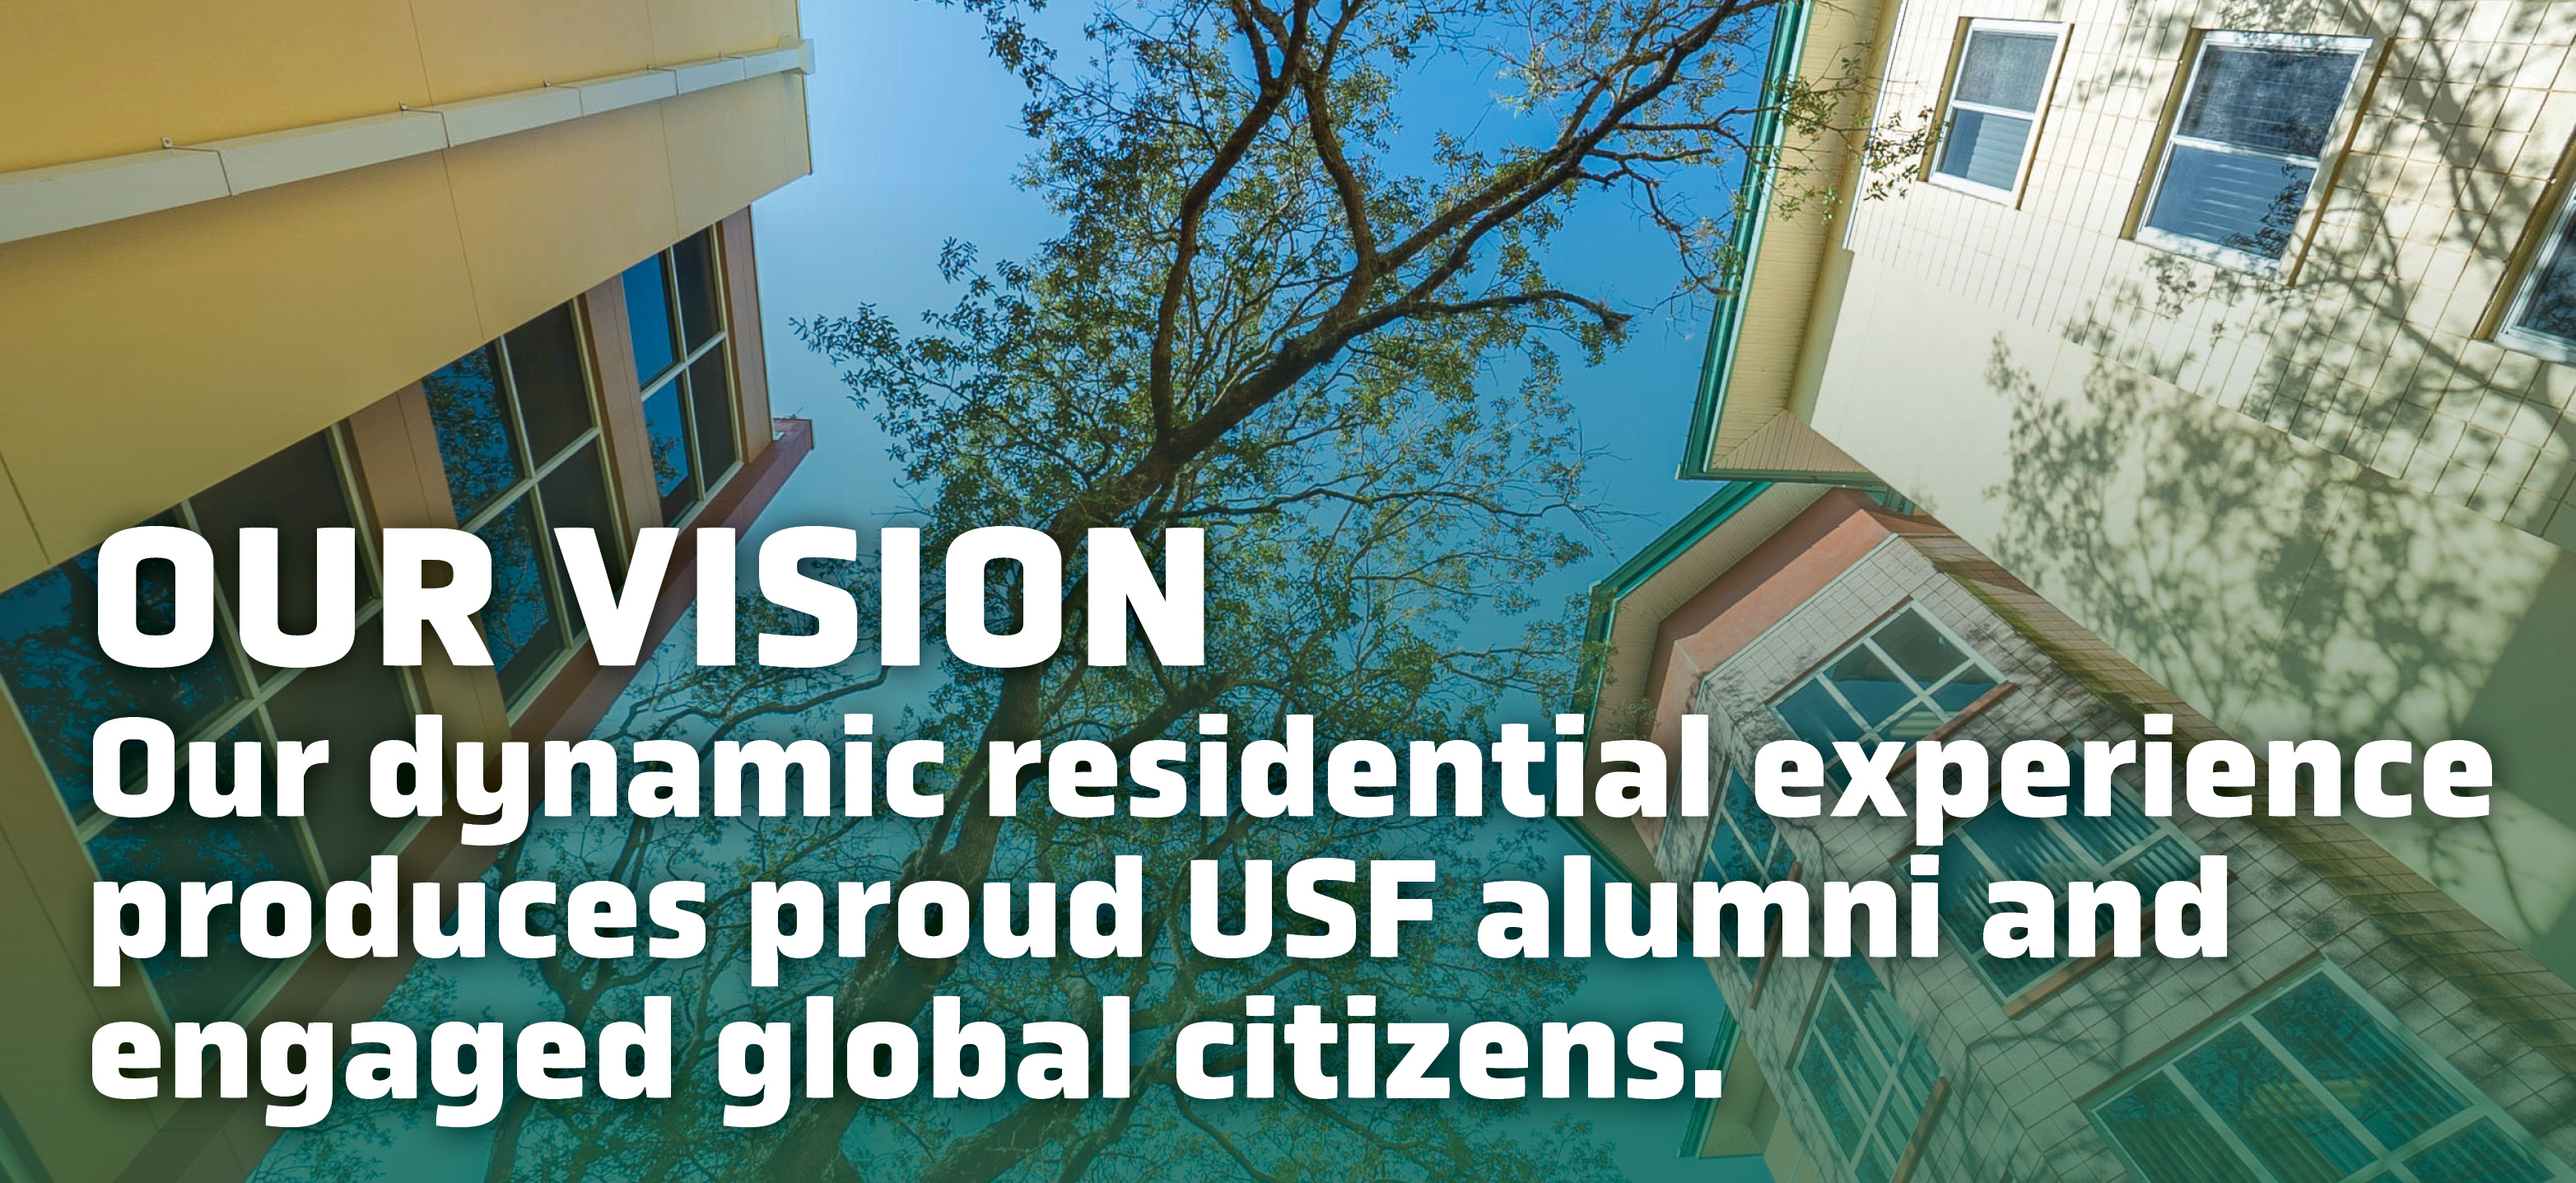 Our Vision: Our dynamic residential experience produces proud USF alumni and engaged global citizens.